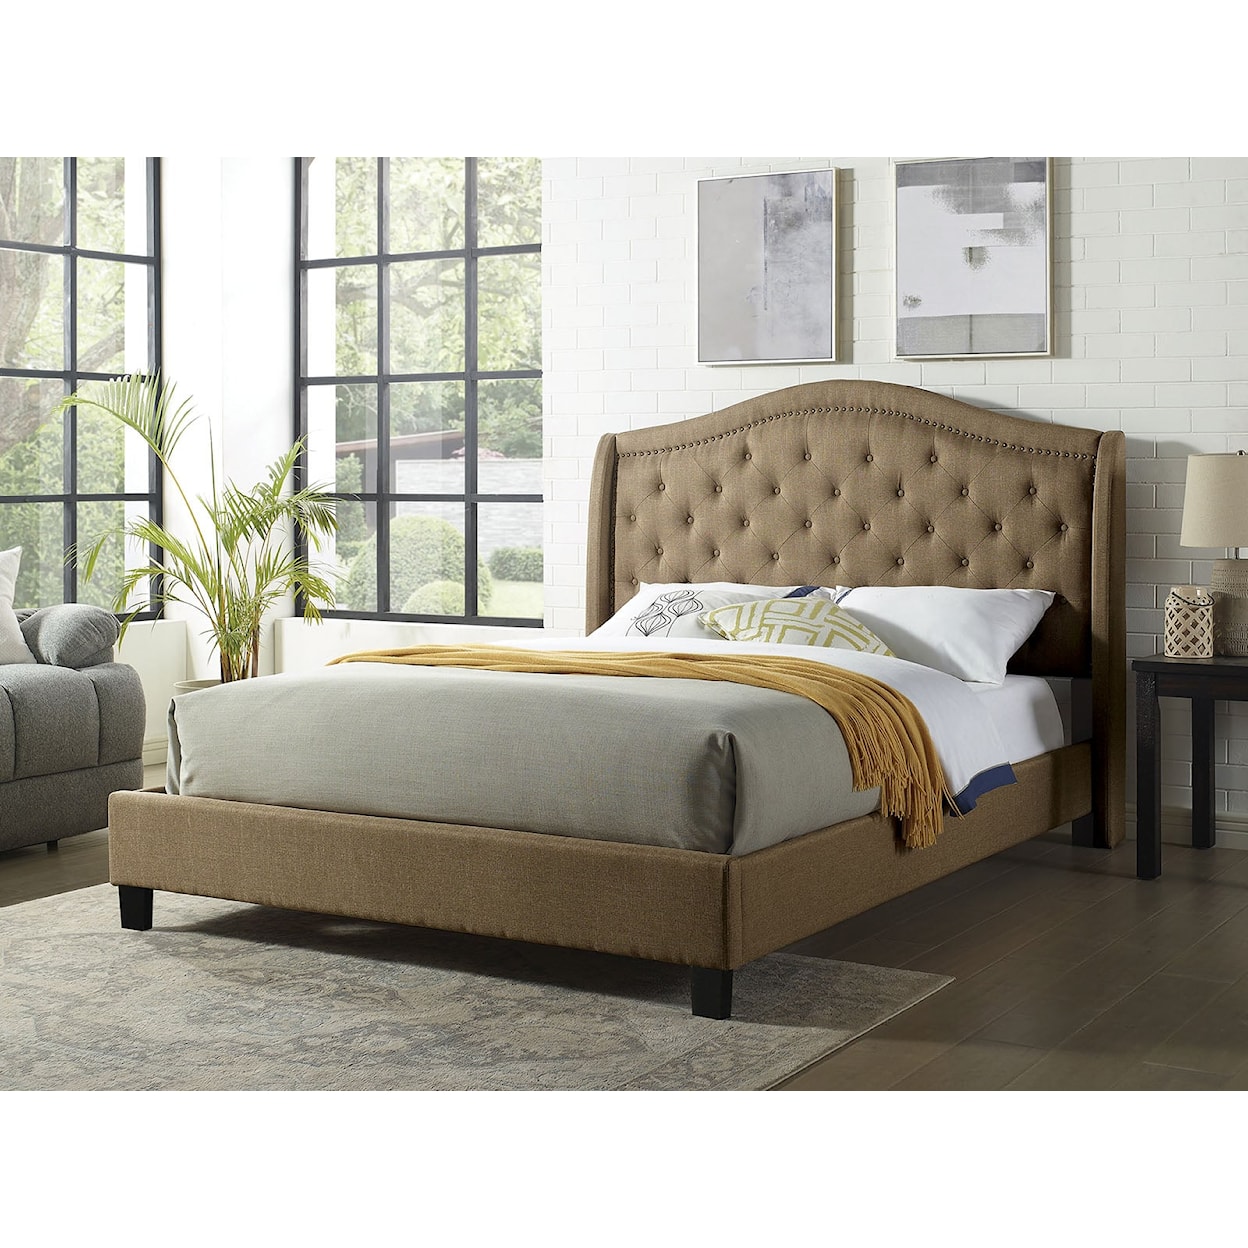 Furniture of America Carly Cal.King Bed, Brown